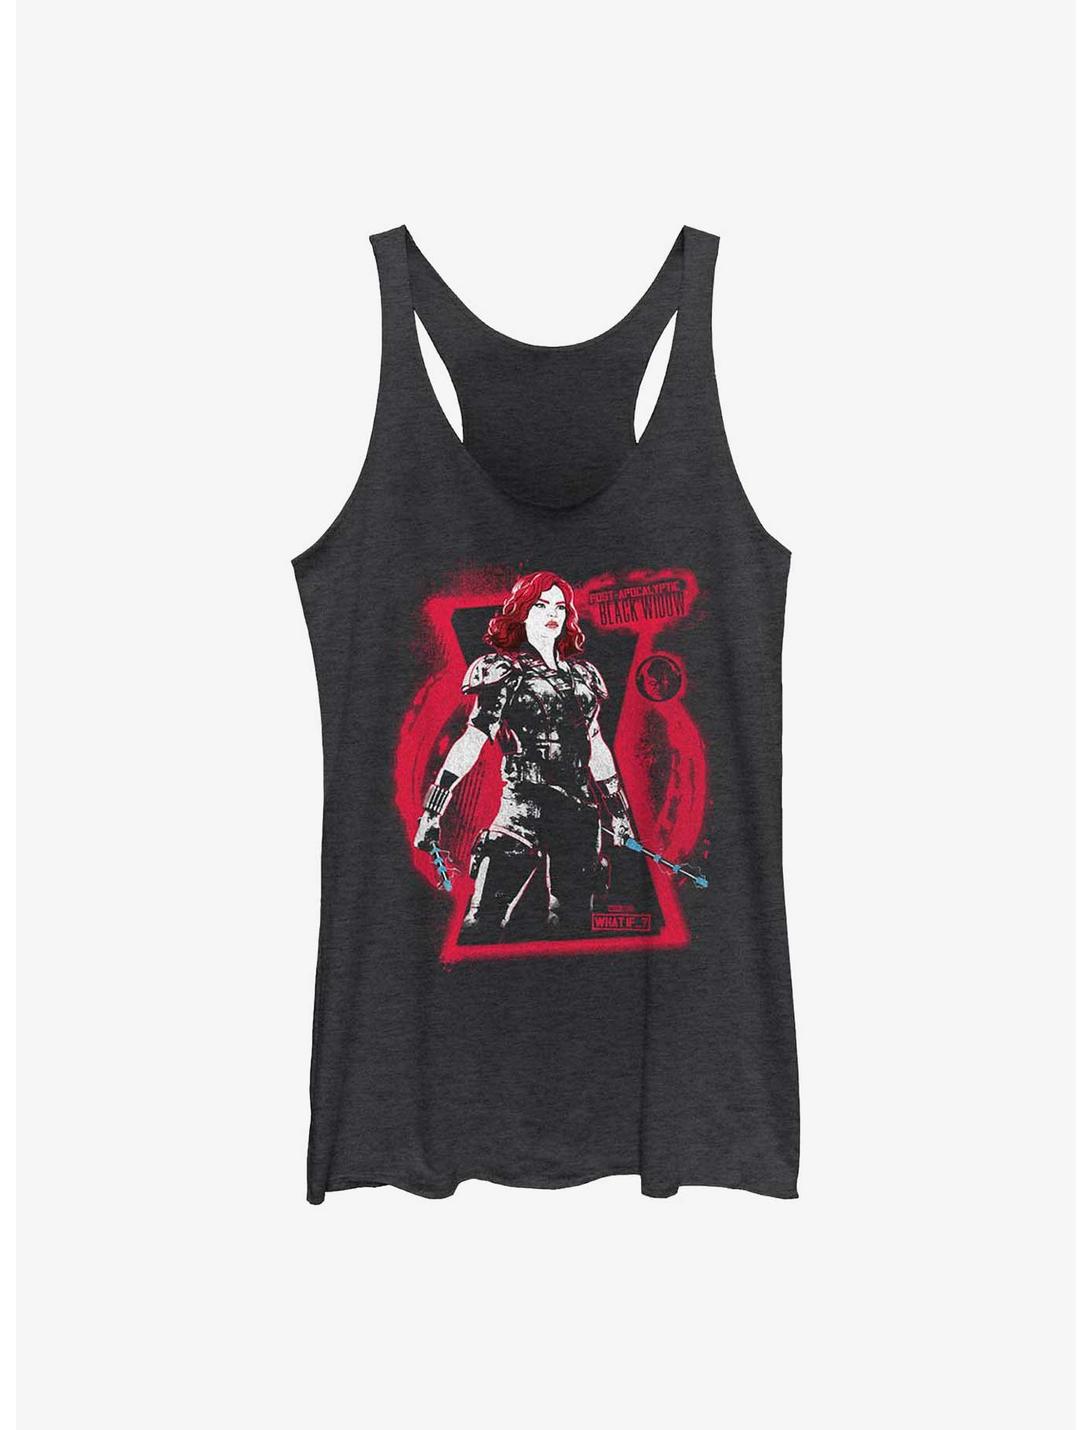 Marvel What If?? Black Widow Post Apocalypse Ready Womens Tank Top, BLK HTR, hi-res